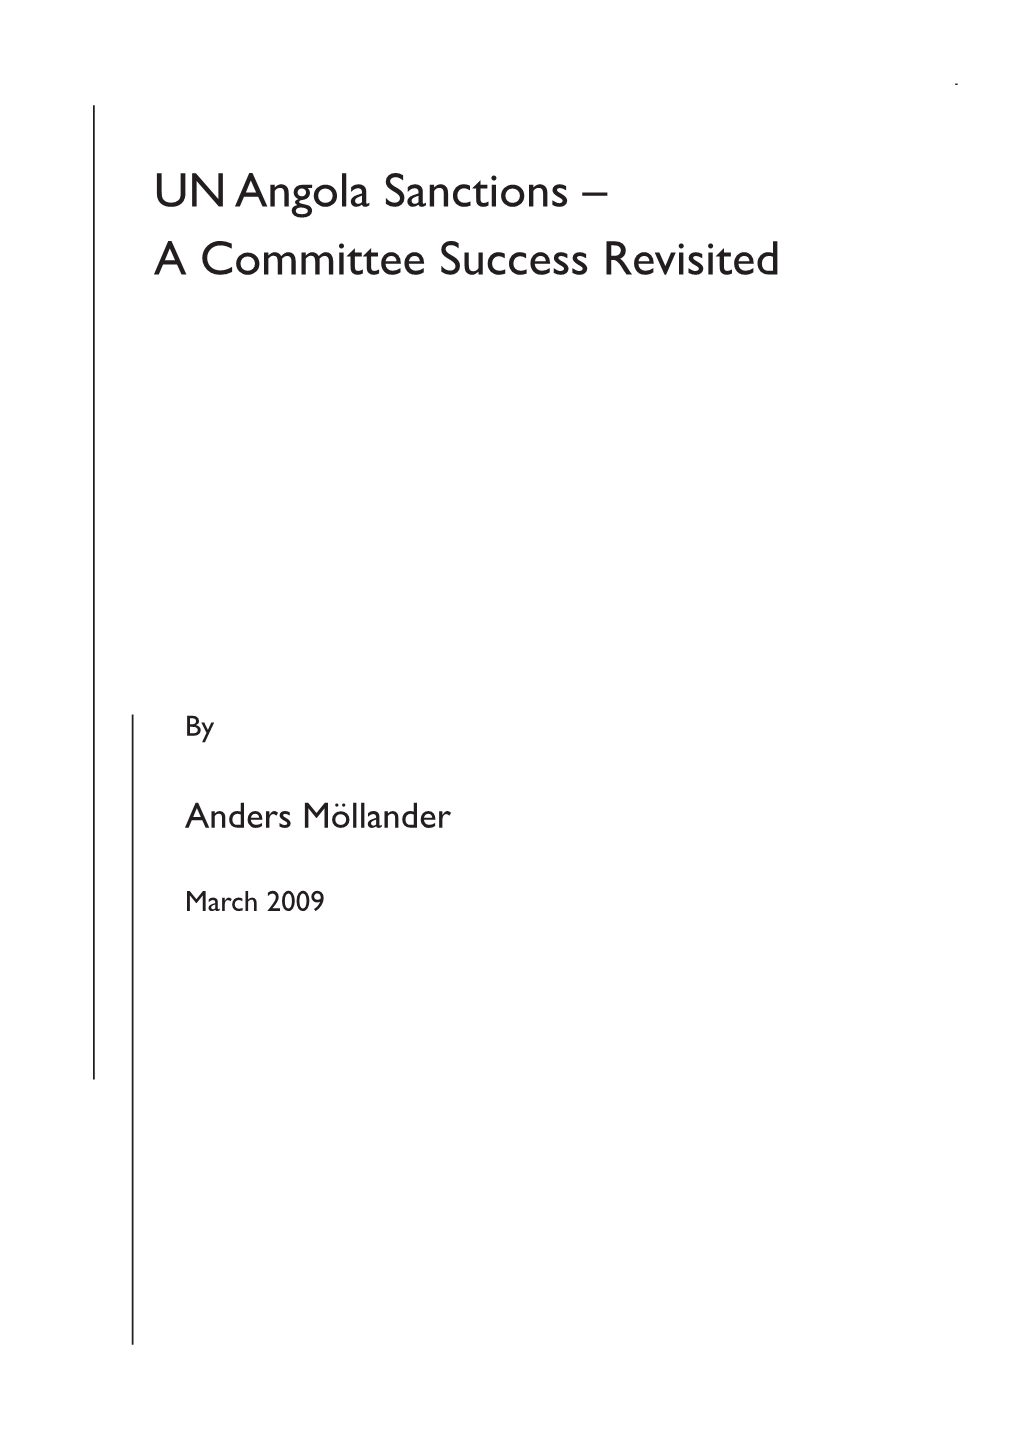 UN Angola Sanctions – a Committee Success Revisited